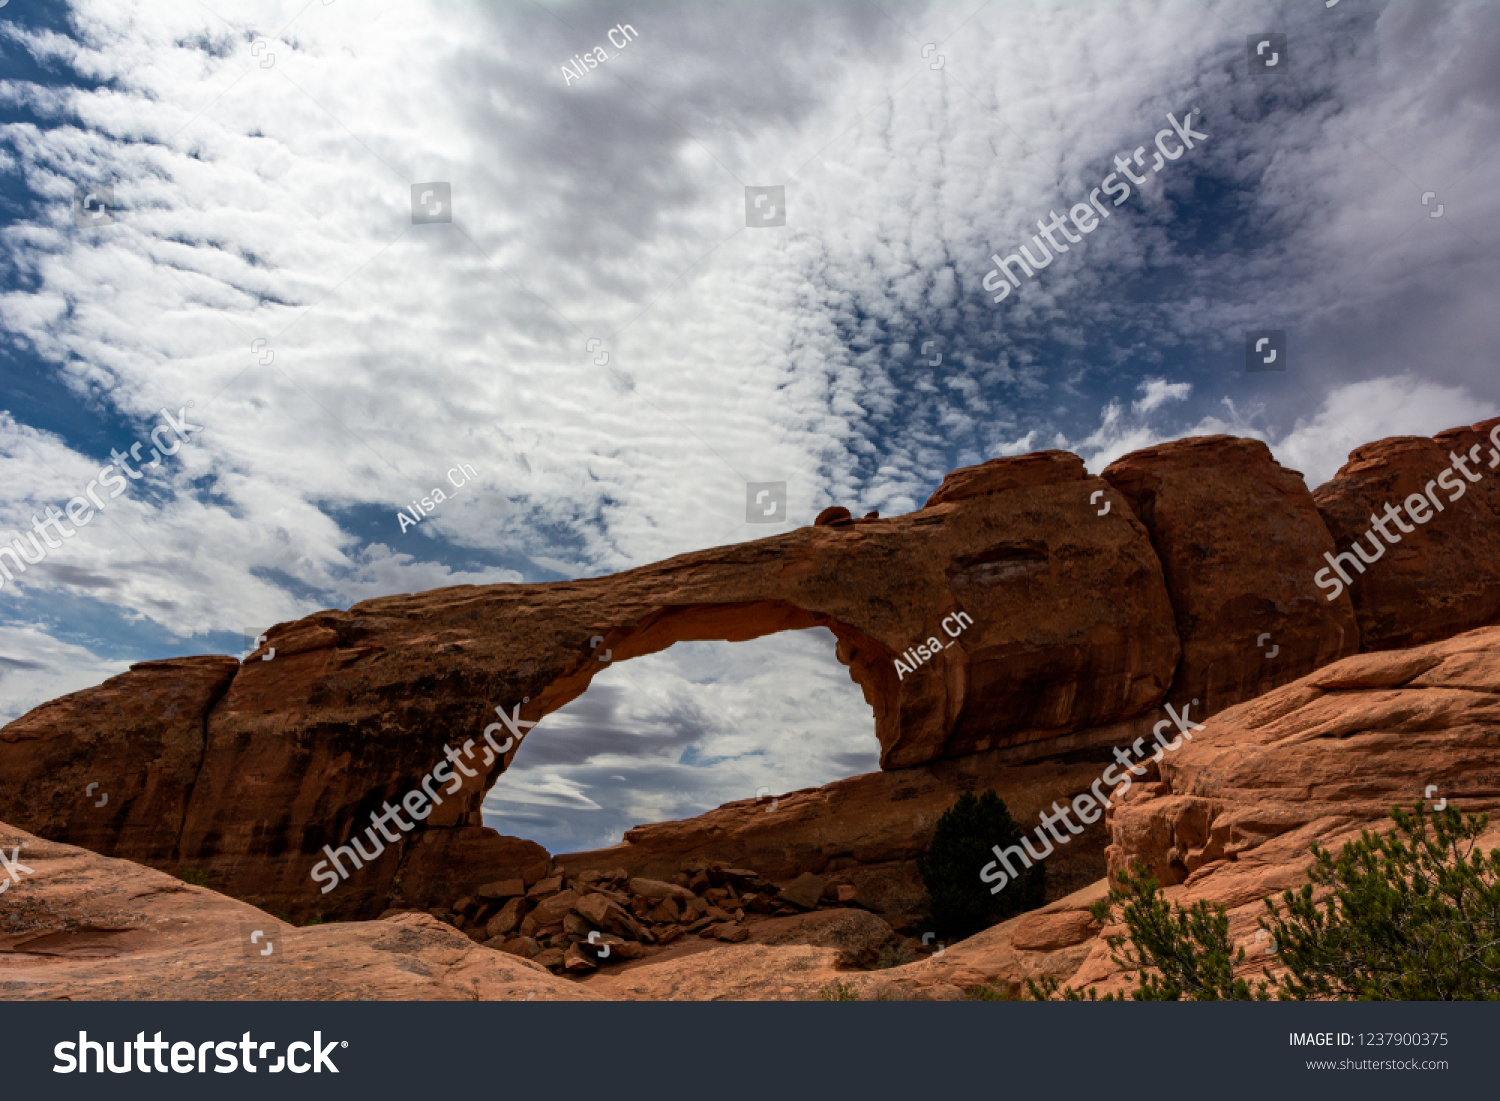 Arches National Park, Utah, USA. Skyline Arch. Skyline Arch sits high atop the rocks of the Devils Garden, visible from many areas of the park. #1237900375